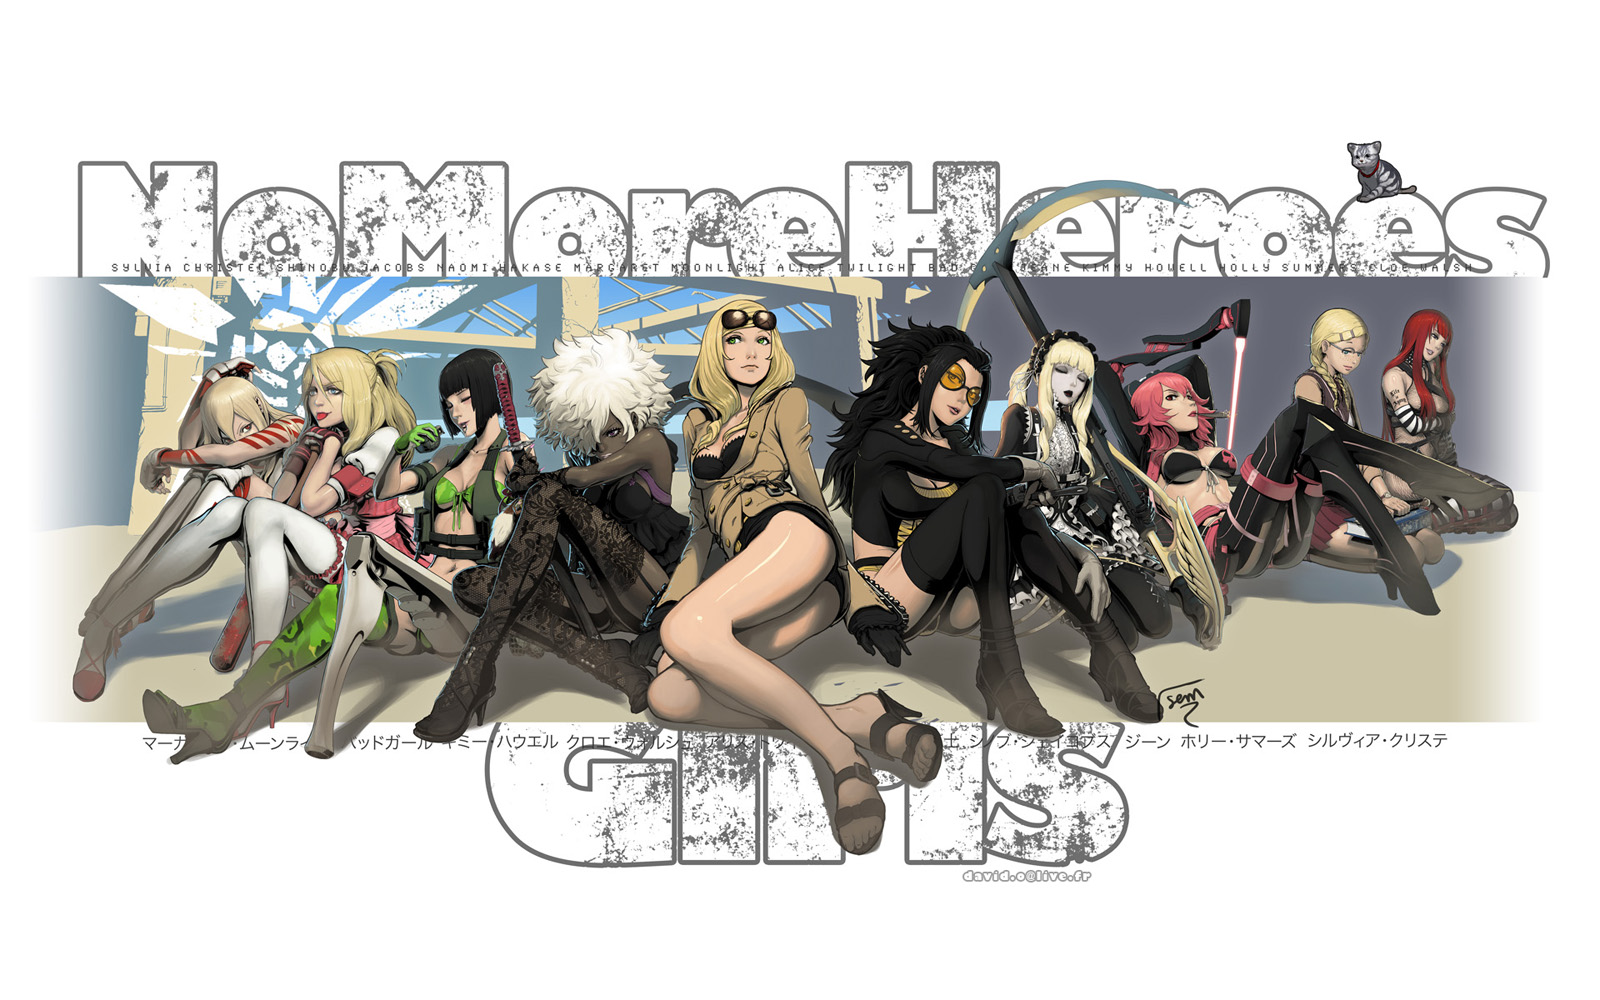 No More Heroes girls - Grasshopper Manufacture.